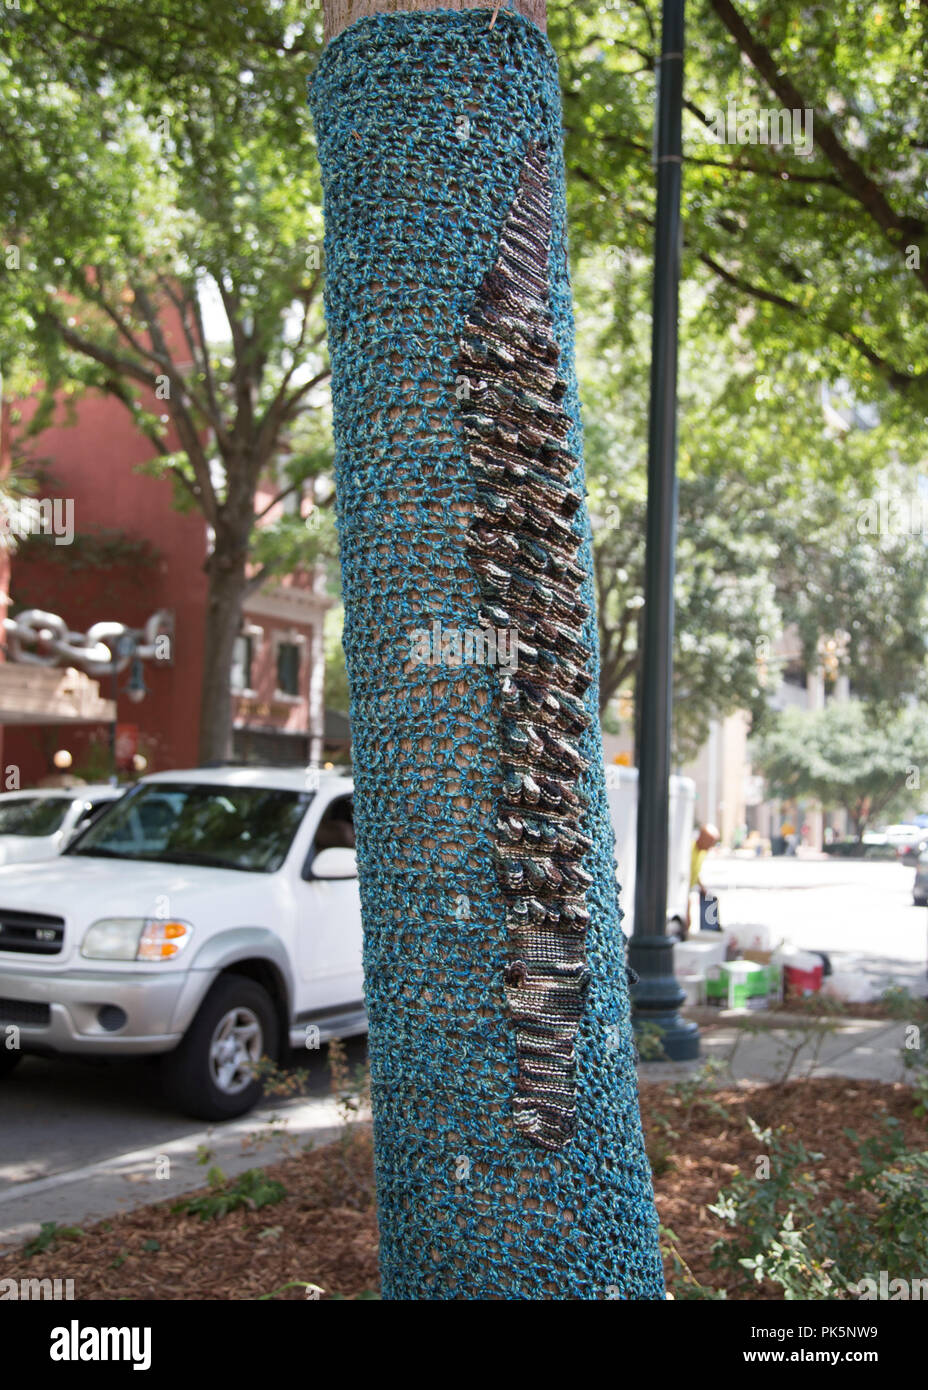 group of guerrilla knitters attacked Main Street Columbia south carolina,they yarn bombed Trees, signs, parking meters, lampposts and bike racks along the 1500 block main Street photo by Catherine Brown Stock Photo